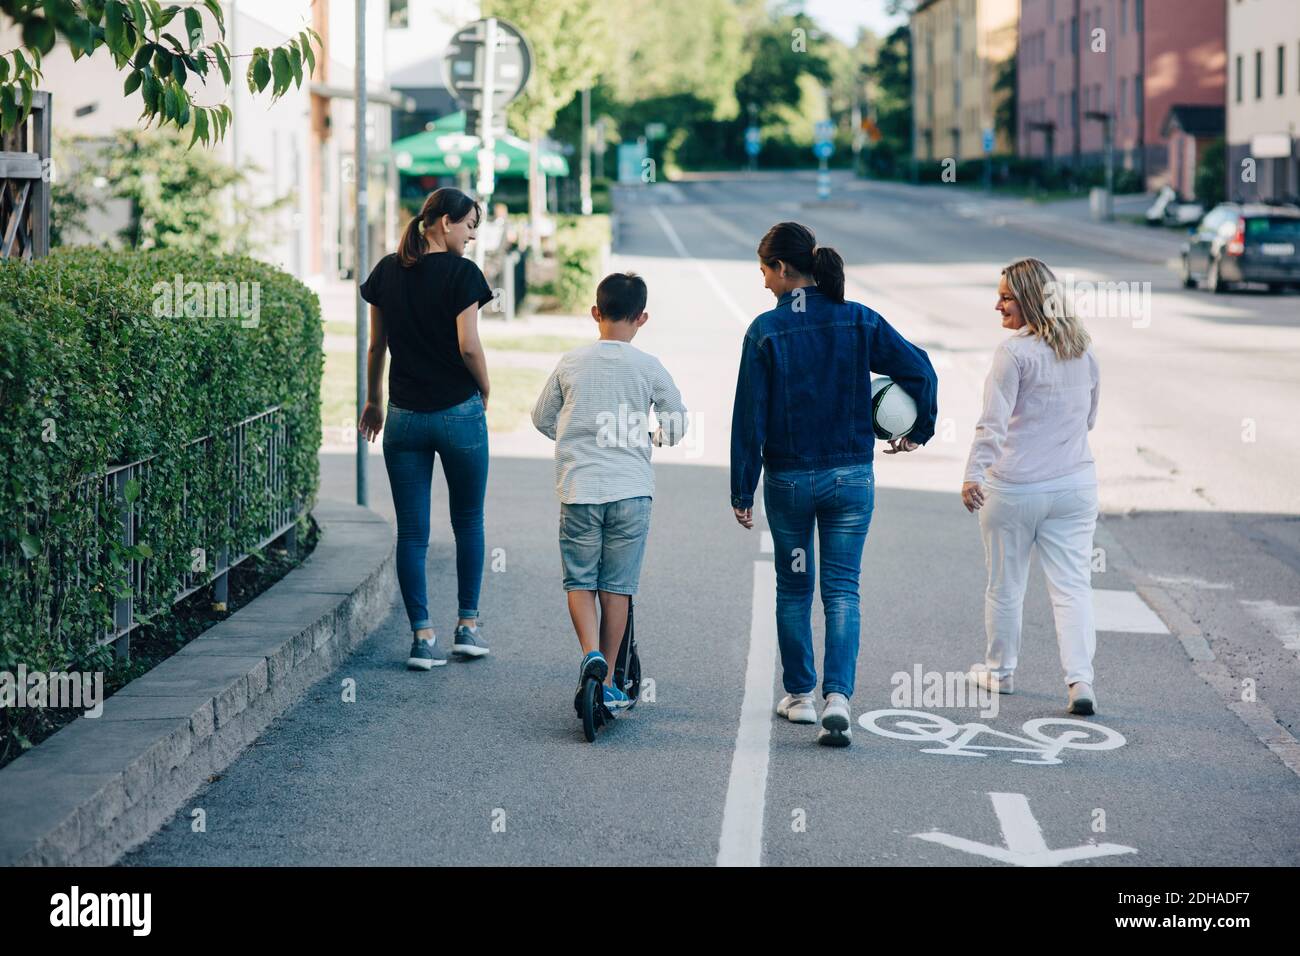 Rear view of family walking on bicycle lane street in city during sunny day Stock Photo